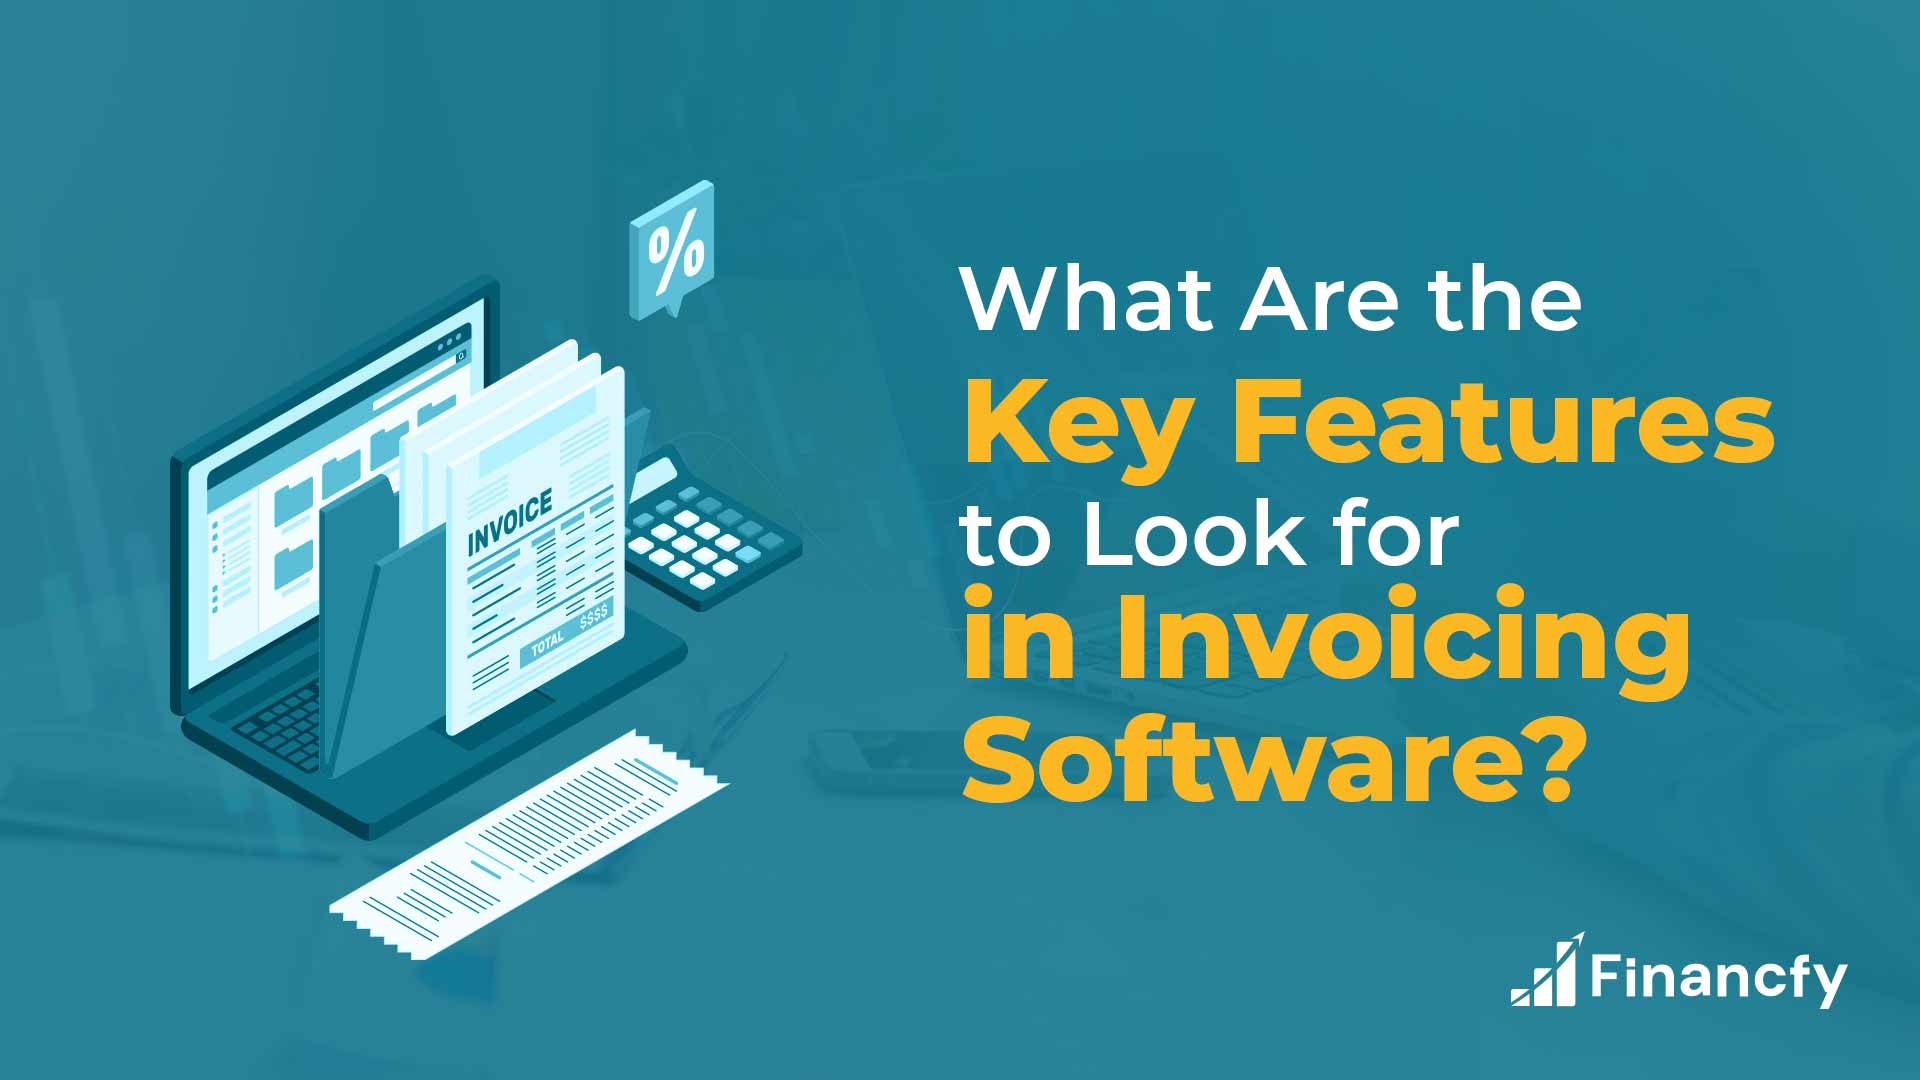 What Are the Key Features to Look for in Invoicing Software?